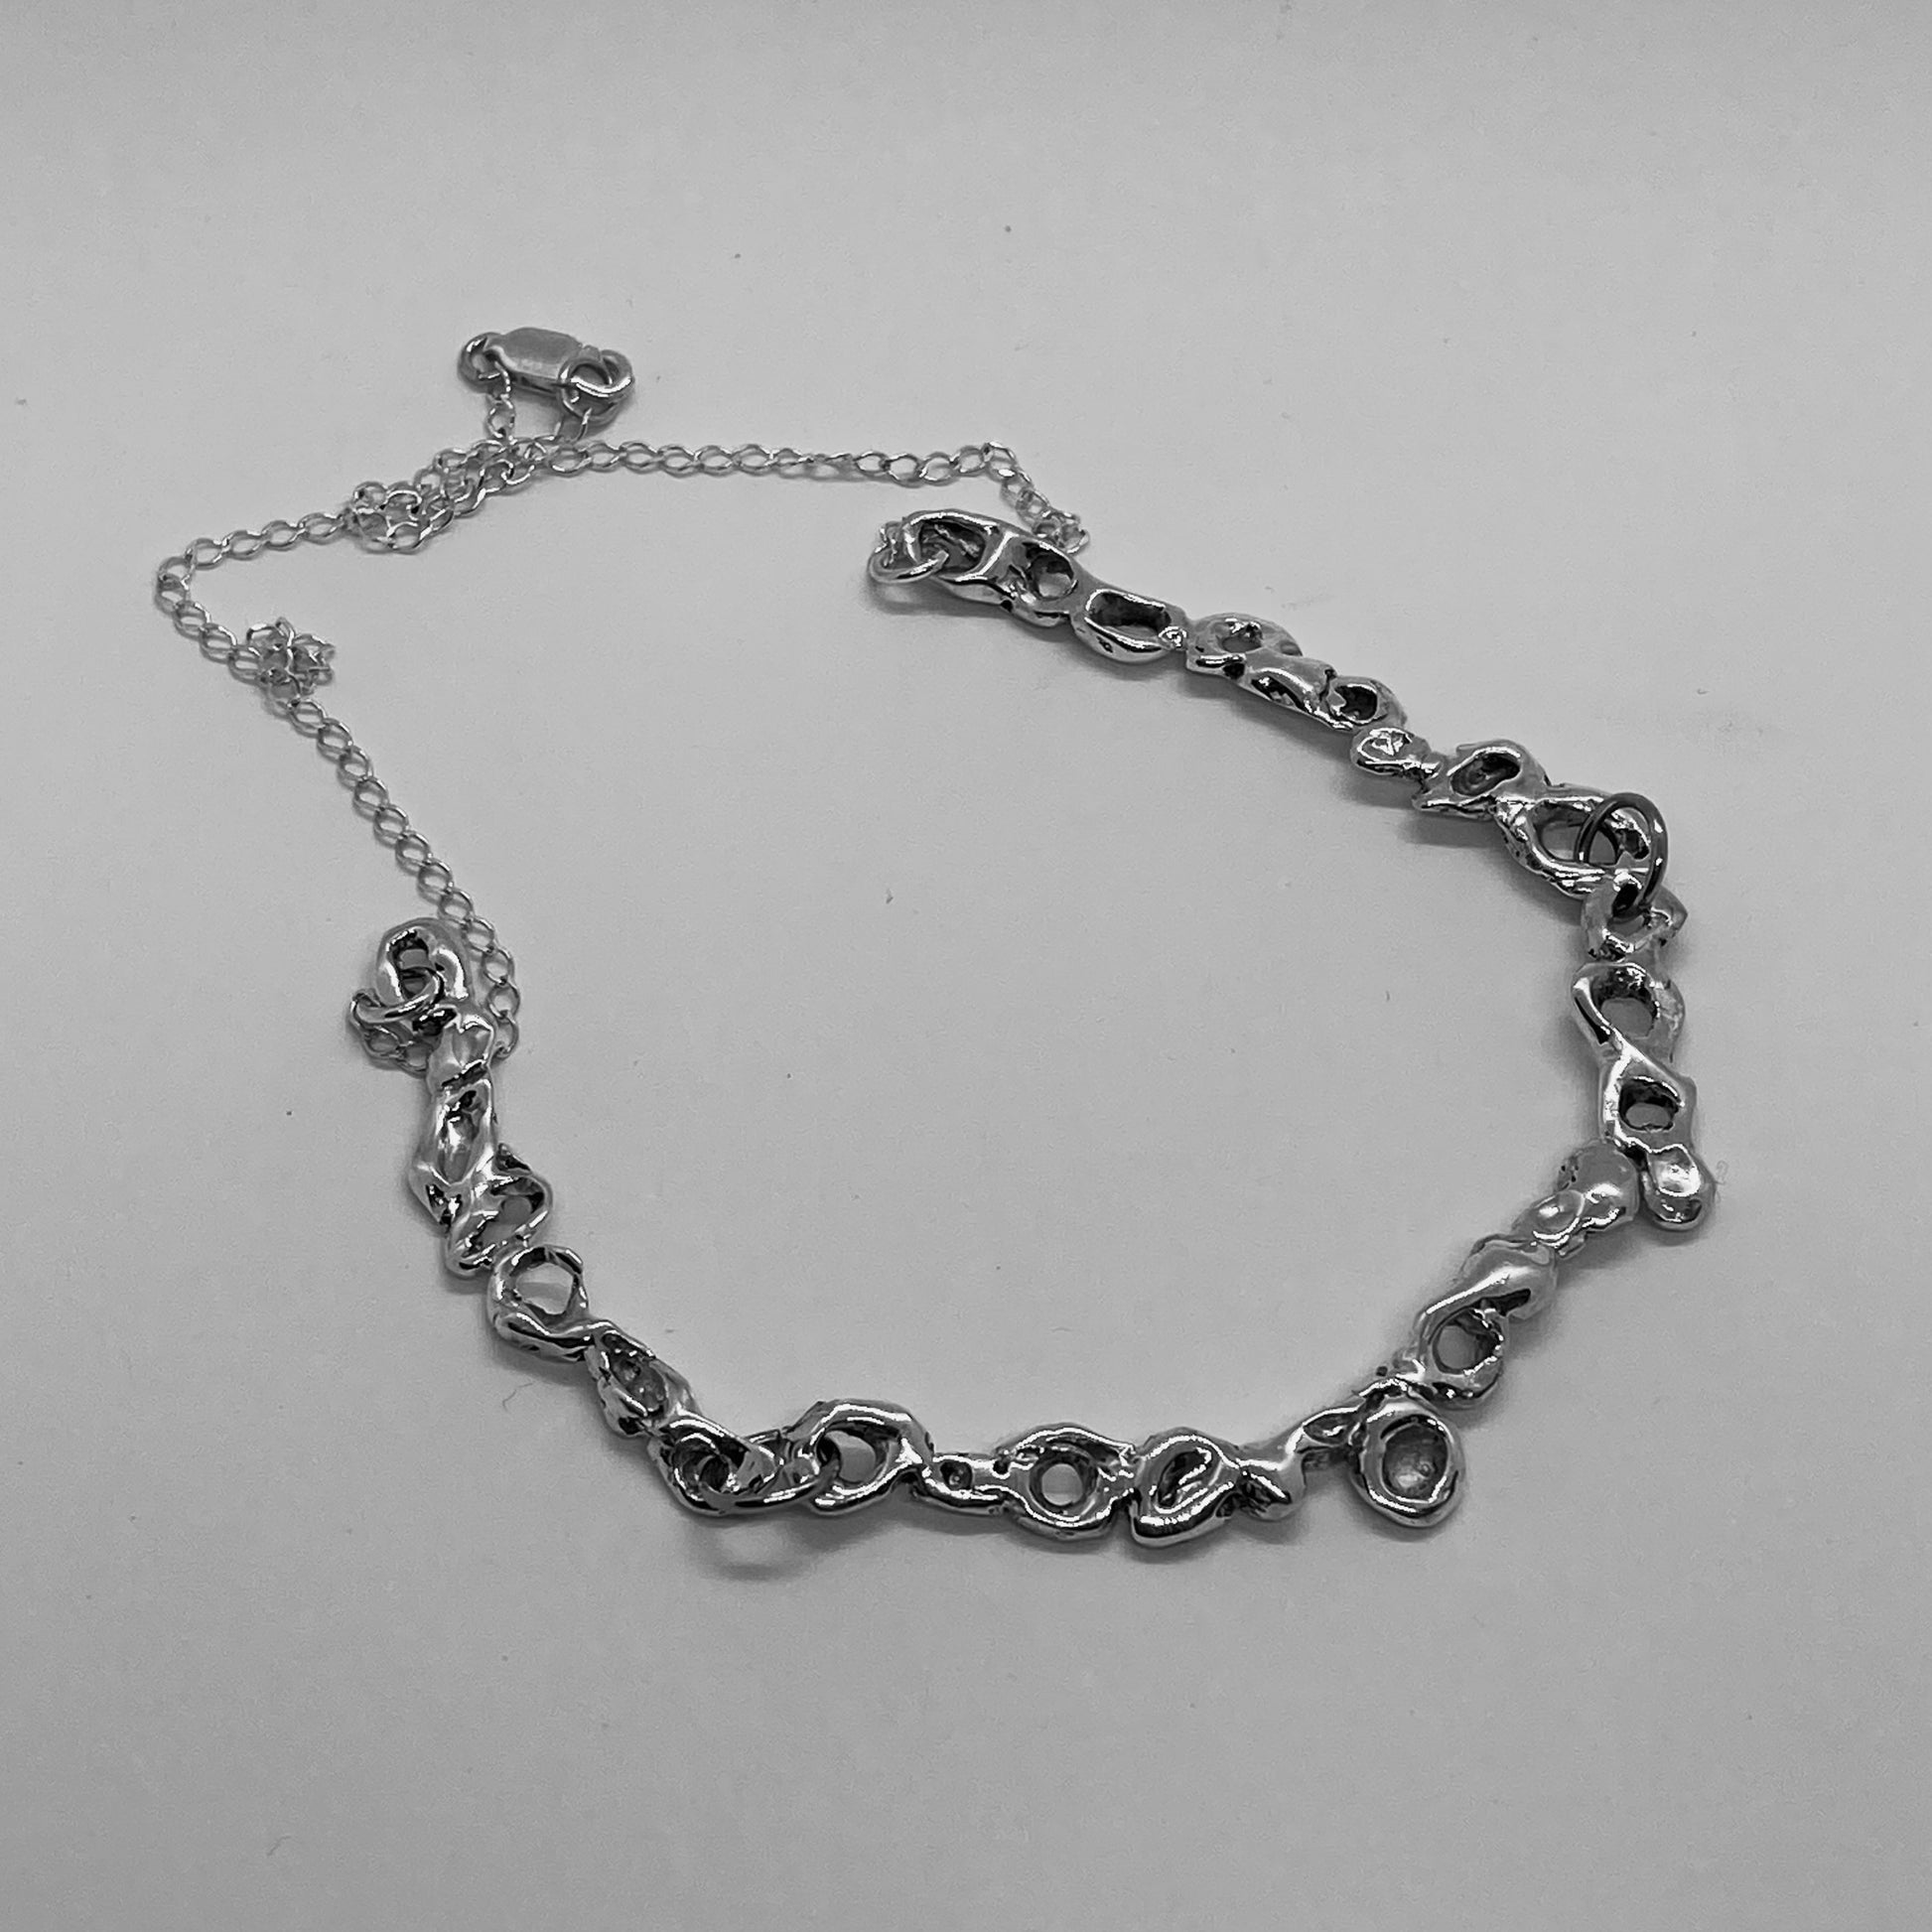  The handmade necklace is made of 925 sterling silver. It features a carved design, and at the end, there is a chain. The surface is polished, giving it a glossy finish